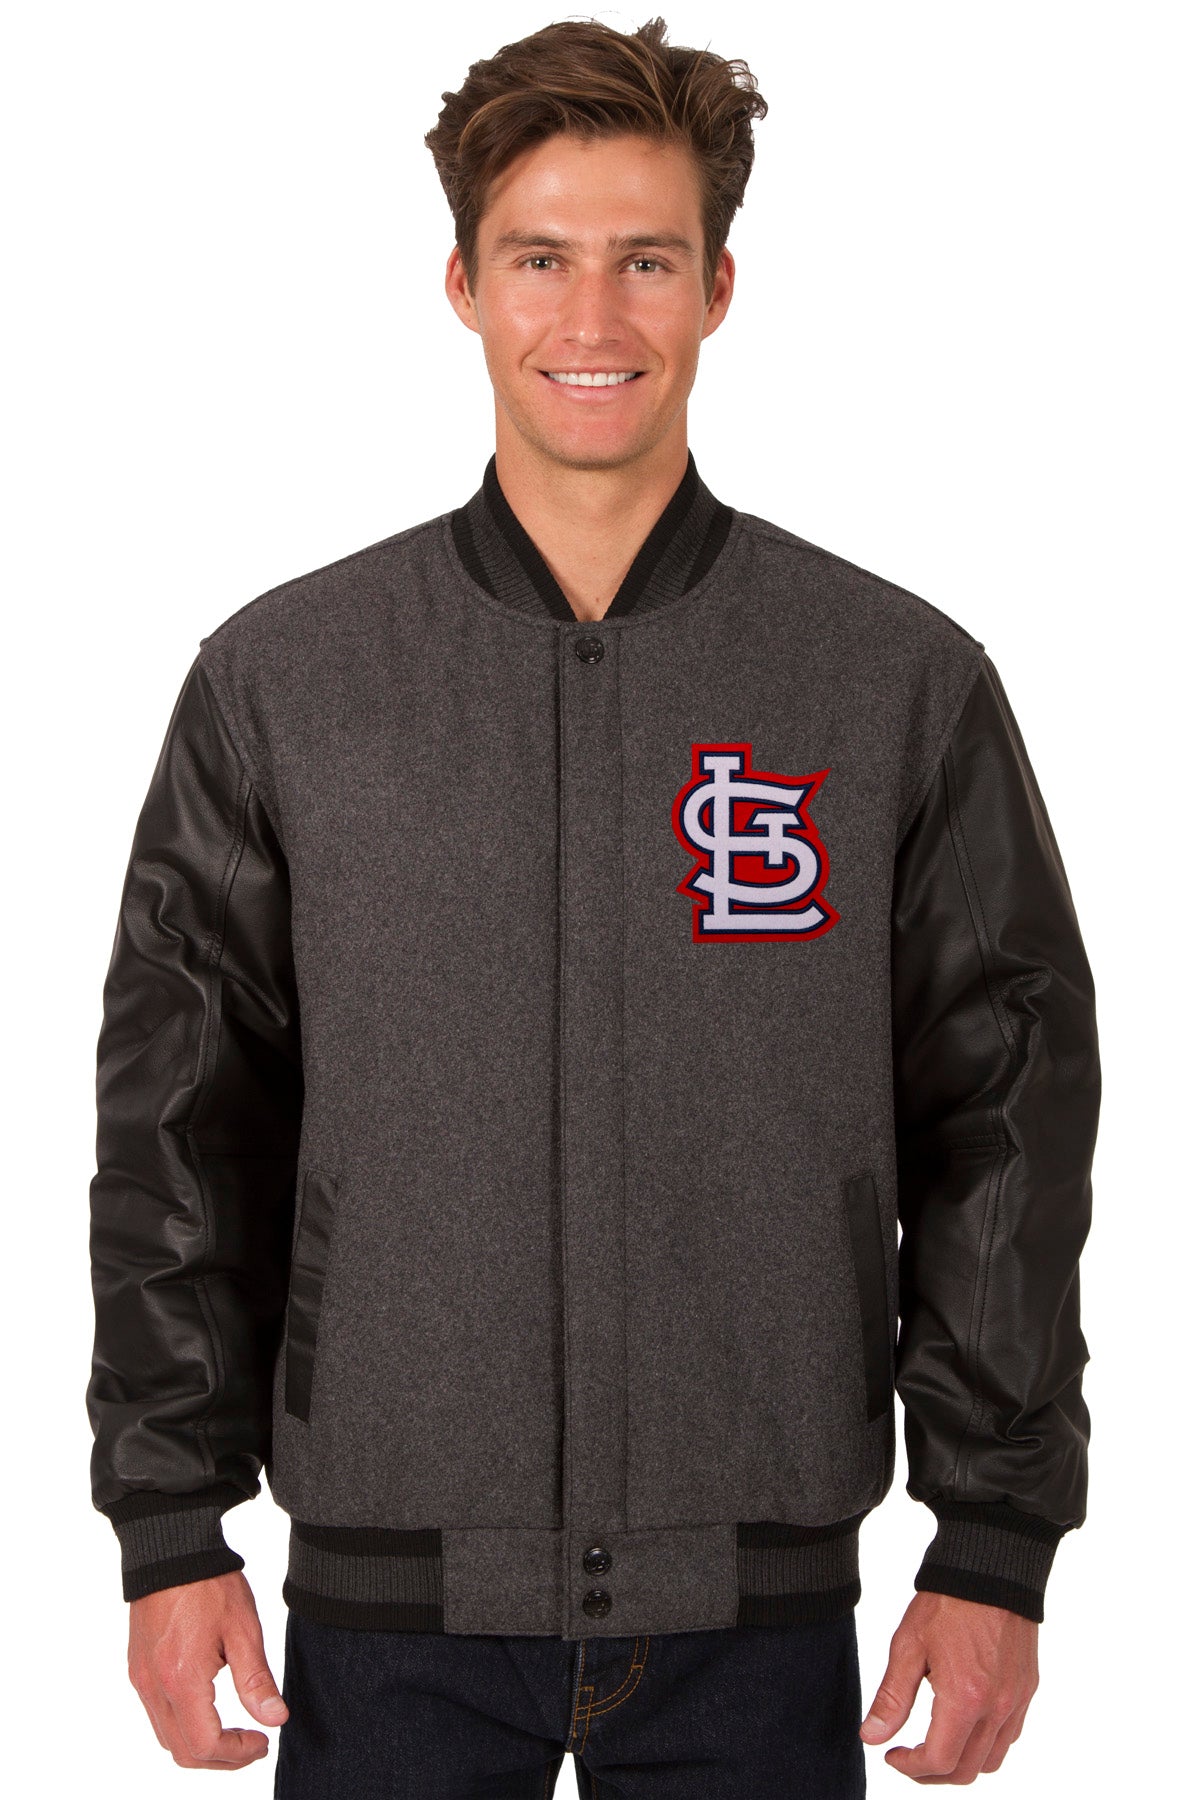 JH Design St. Louis Cardinals Wool & Leather Reversible Jacket w/ Embroidered Logos - Charcoal/Black 3X-Large